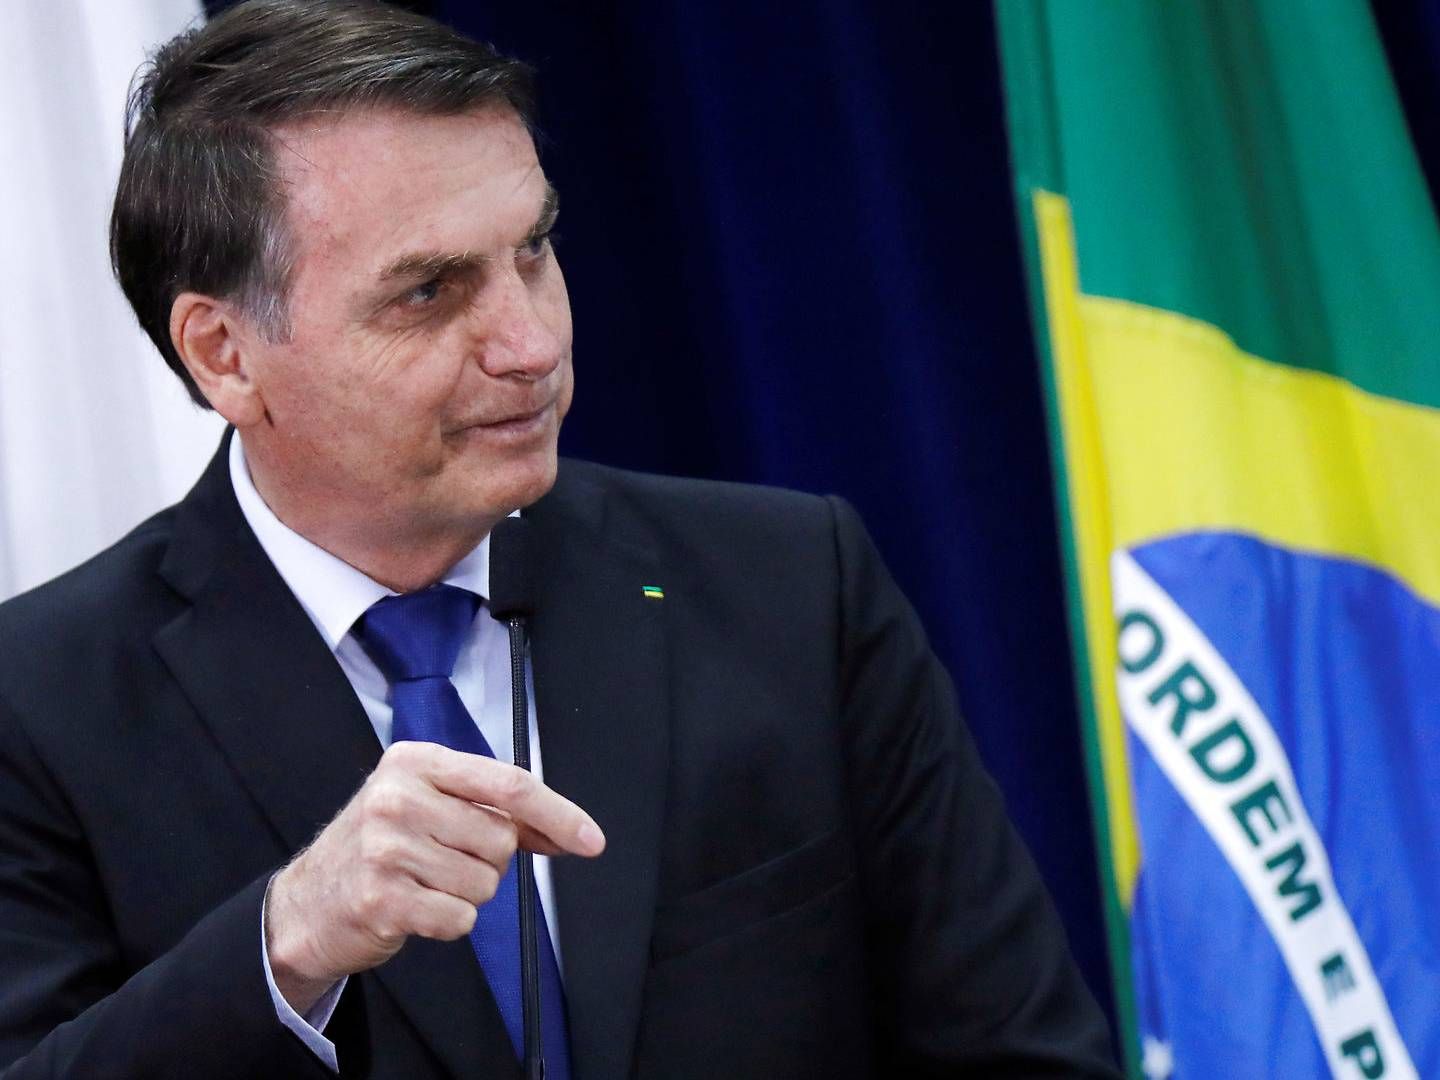 "Bolsonaro (Brazilian president) was considered one of the most market-friendly candidates, and his election boosted market optimism. So, when the markets woke up to the positive development, the local exchange reflected this in a very positive way," Seligson Asset Management Fund Manager Jonathan Aalto | Photo: Adriano Machado/Reuters/Ritzau Scanpix/REUTERS / X02151